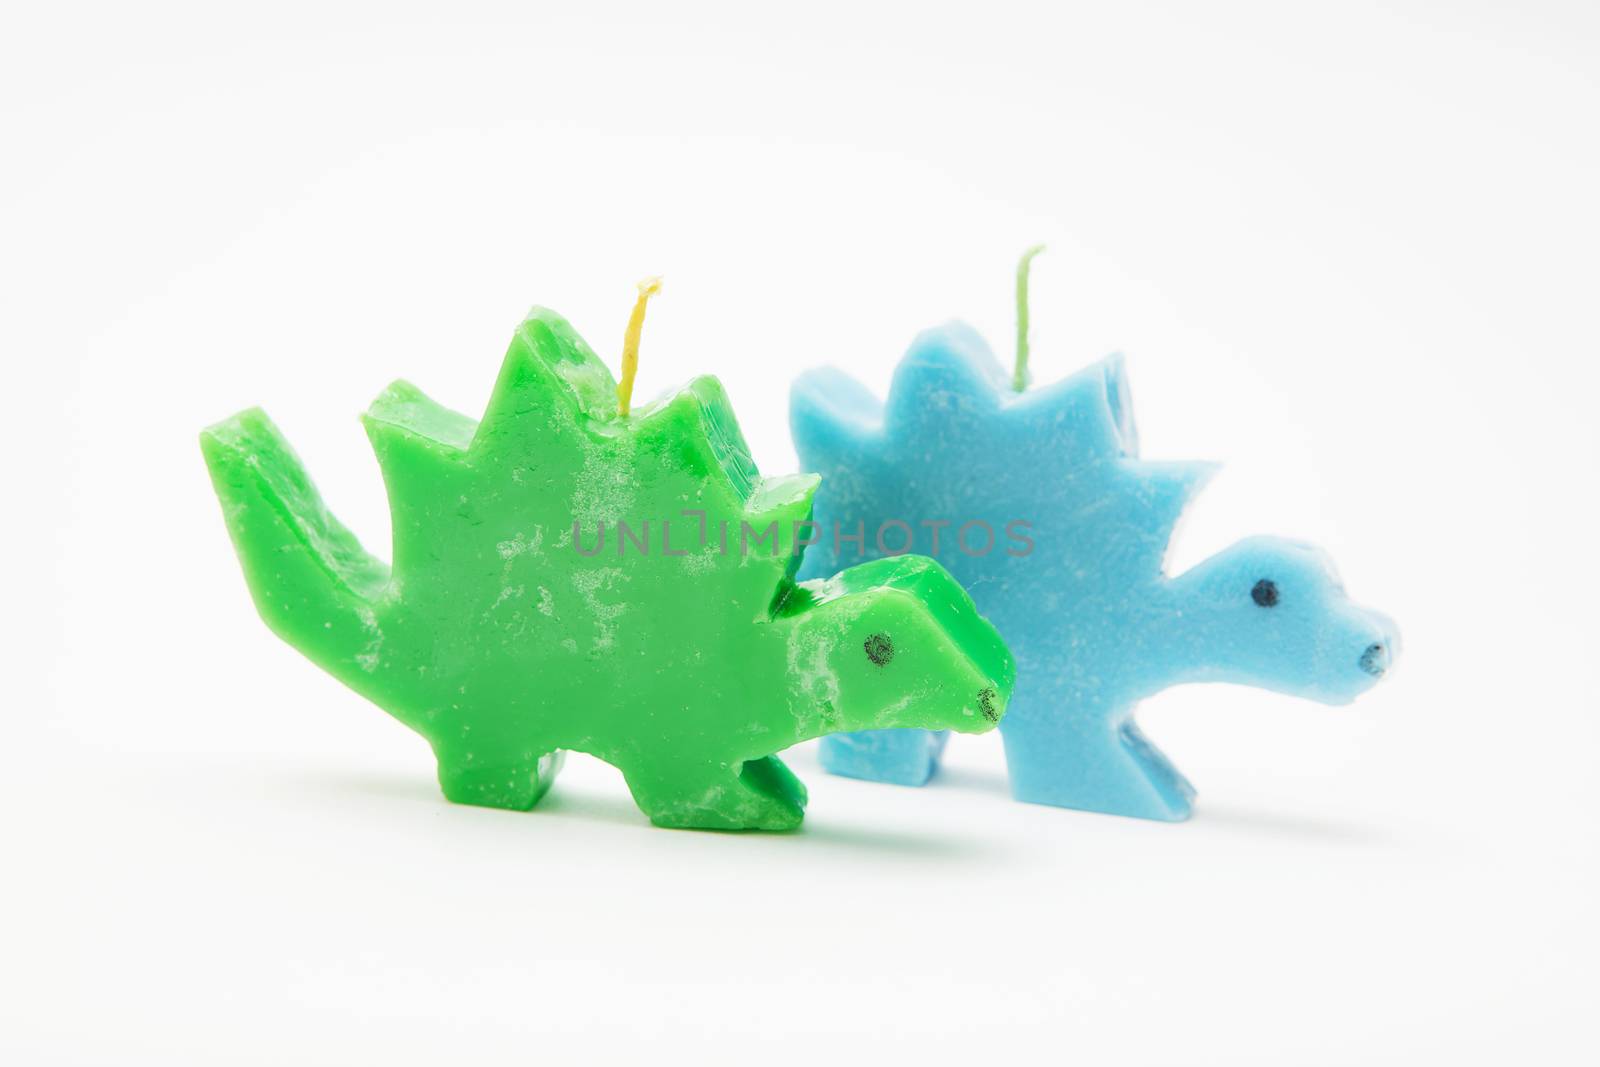 Funny Souvenir gift candles in the shape of multicolored dragons by natazhekova